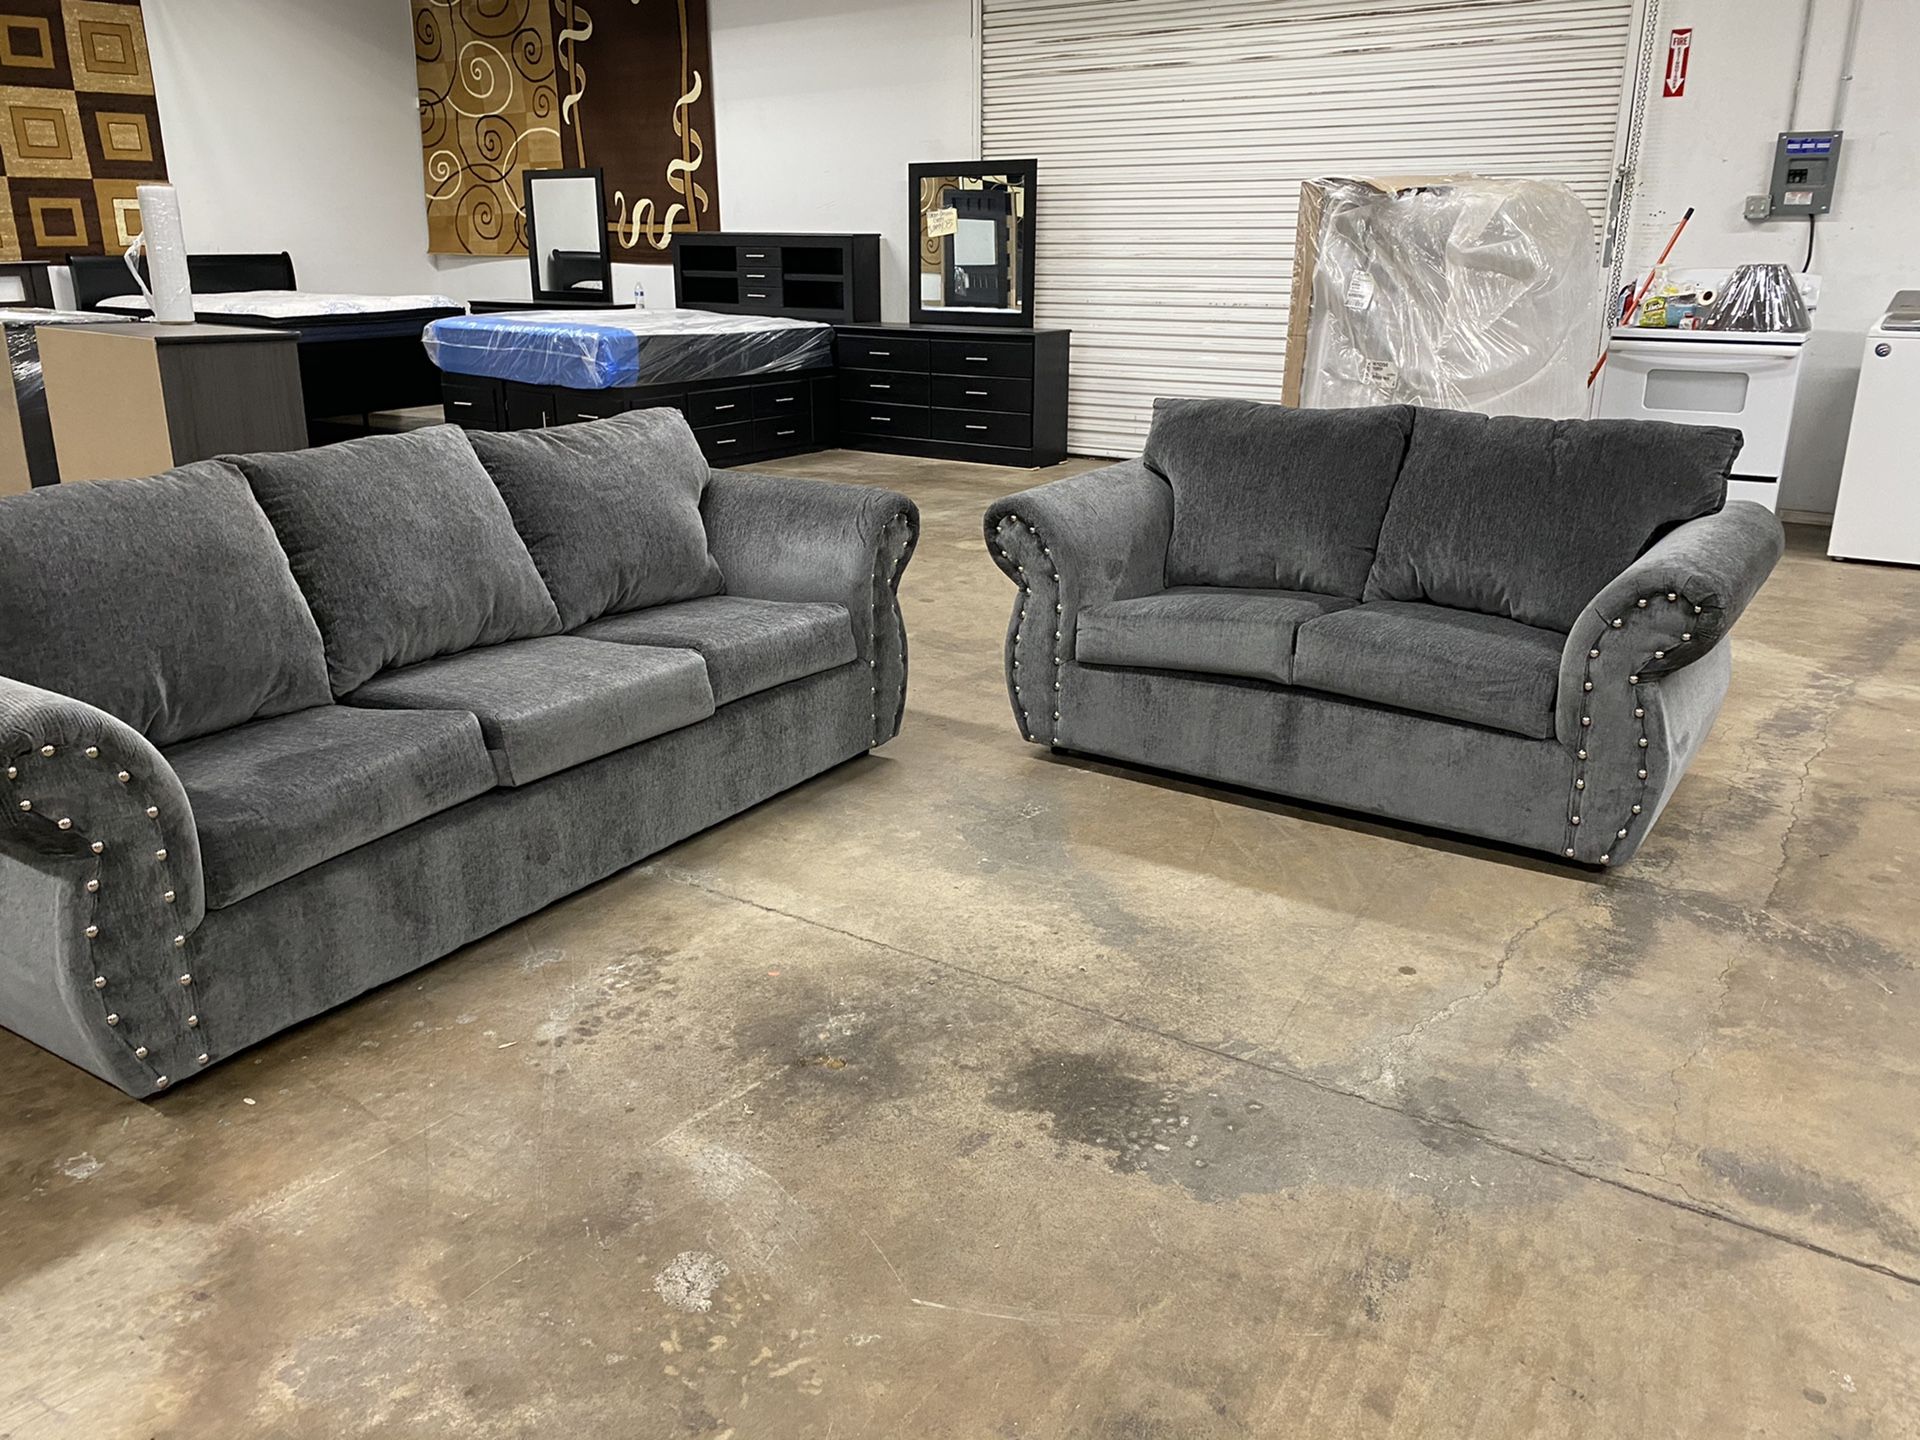 brand new grey set $675 free rug of your choice